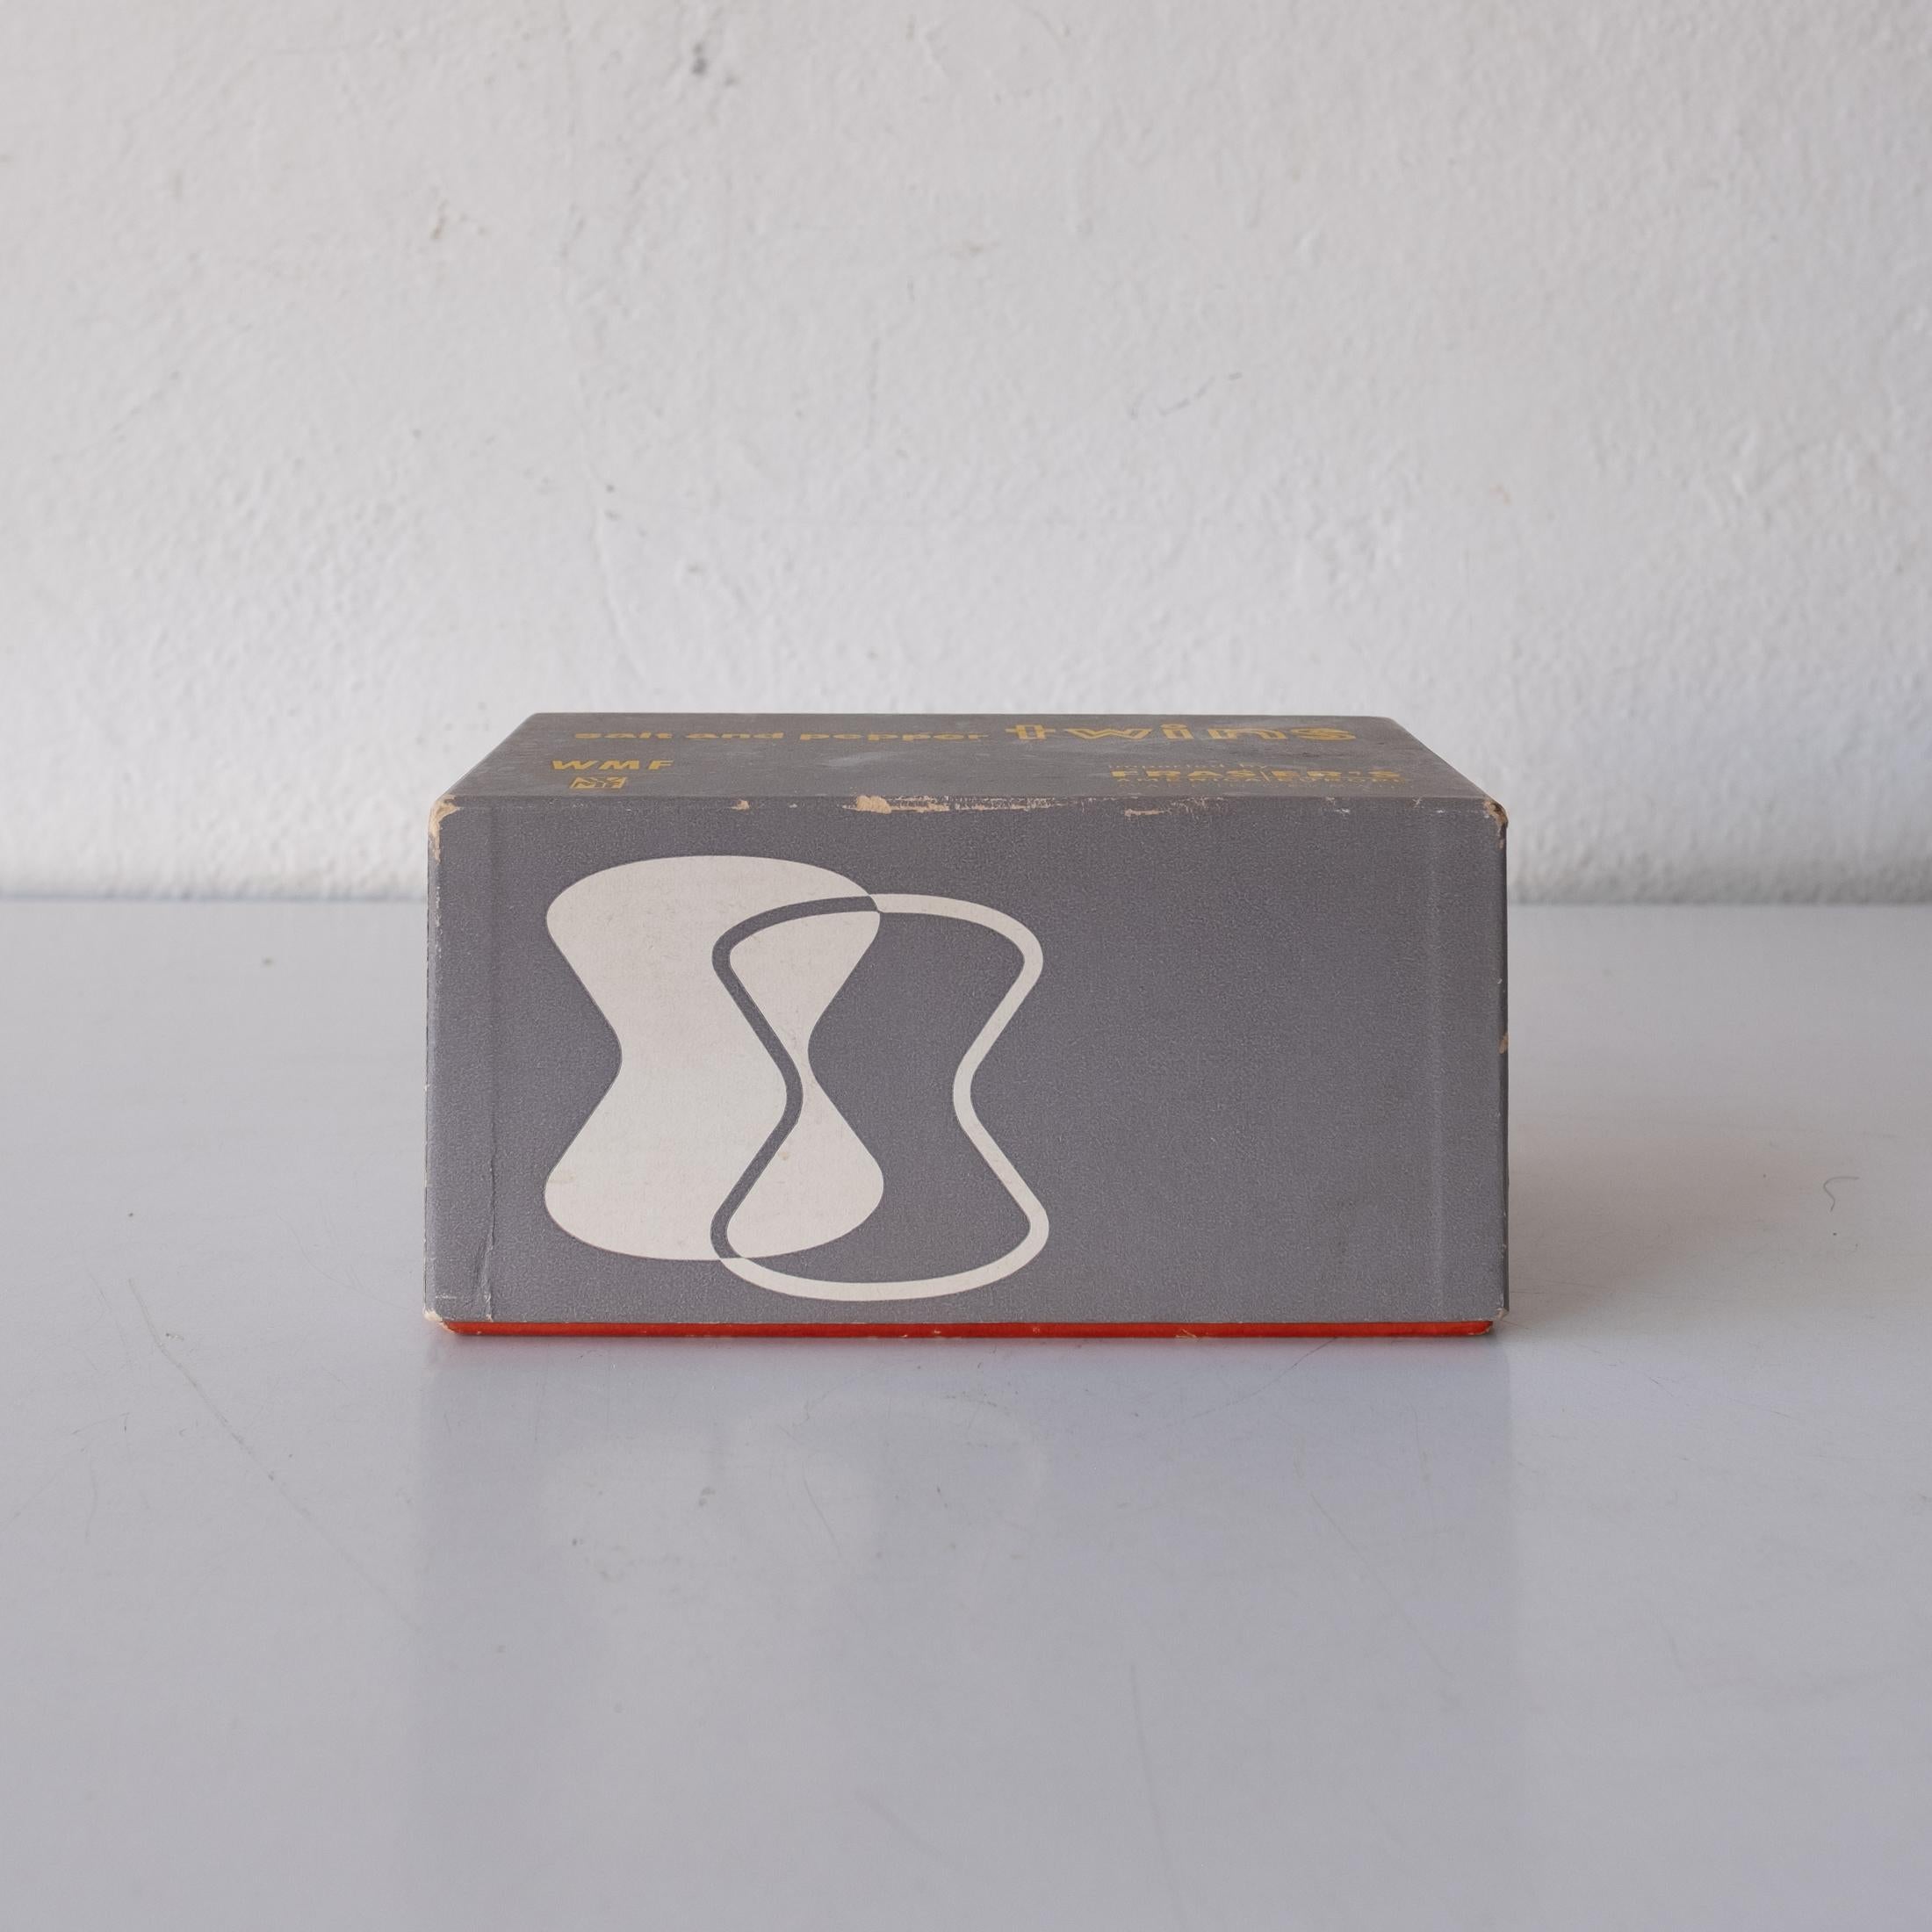 Wilhelm Wagenfeld glass and stainless steel salt and Pepper Shakers, 1952. Produced by WMF of Germany.
Selected for the MoMA Good Design Exhibition and part of their permanent collection.

Unused in the original 1950s box from the prestigious